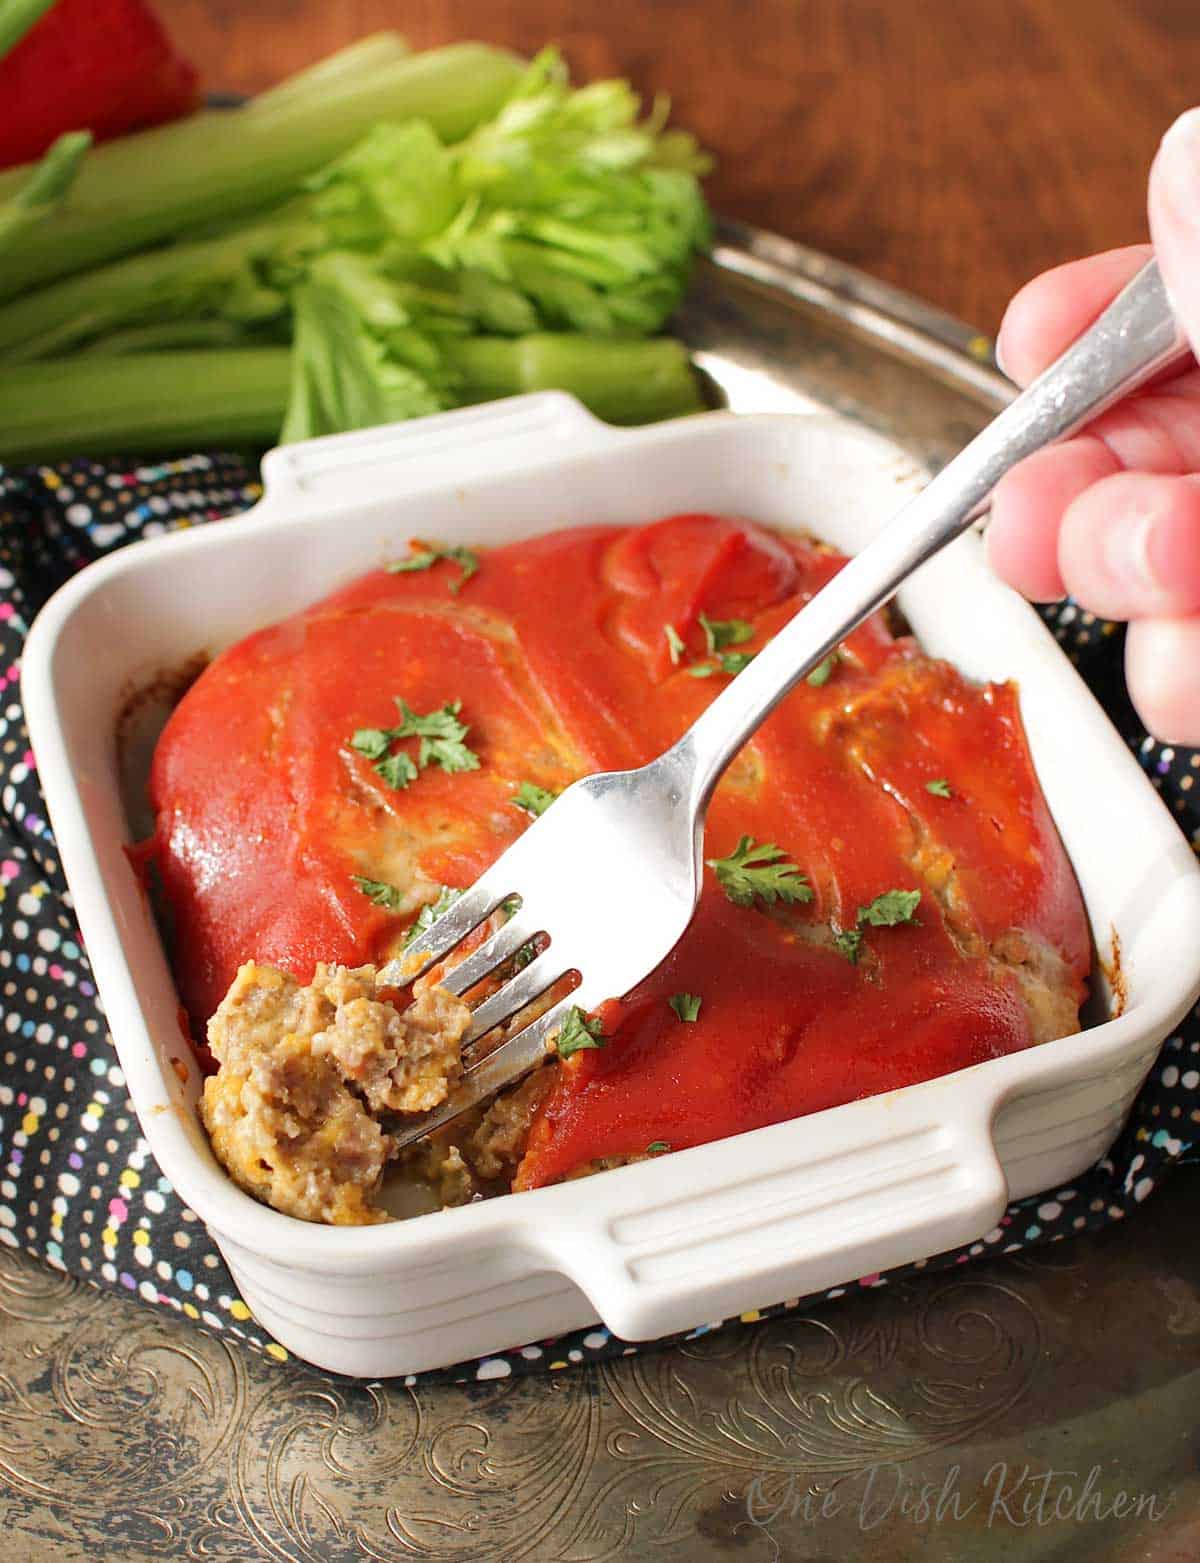 A forkful of bacon cheeseburger meatloaf from a small baking dish next to a bunch of celery all on a metal tray